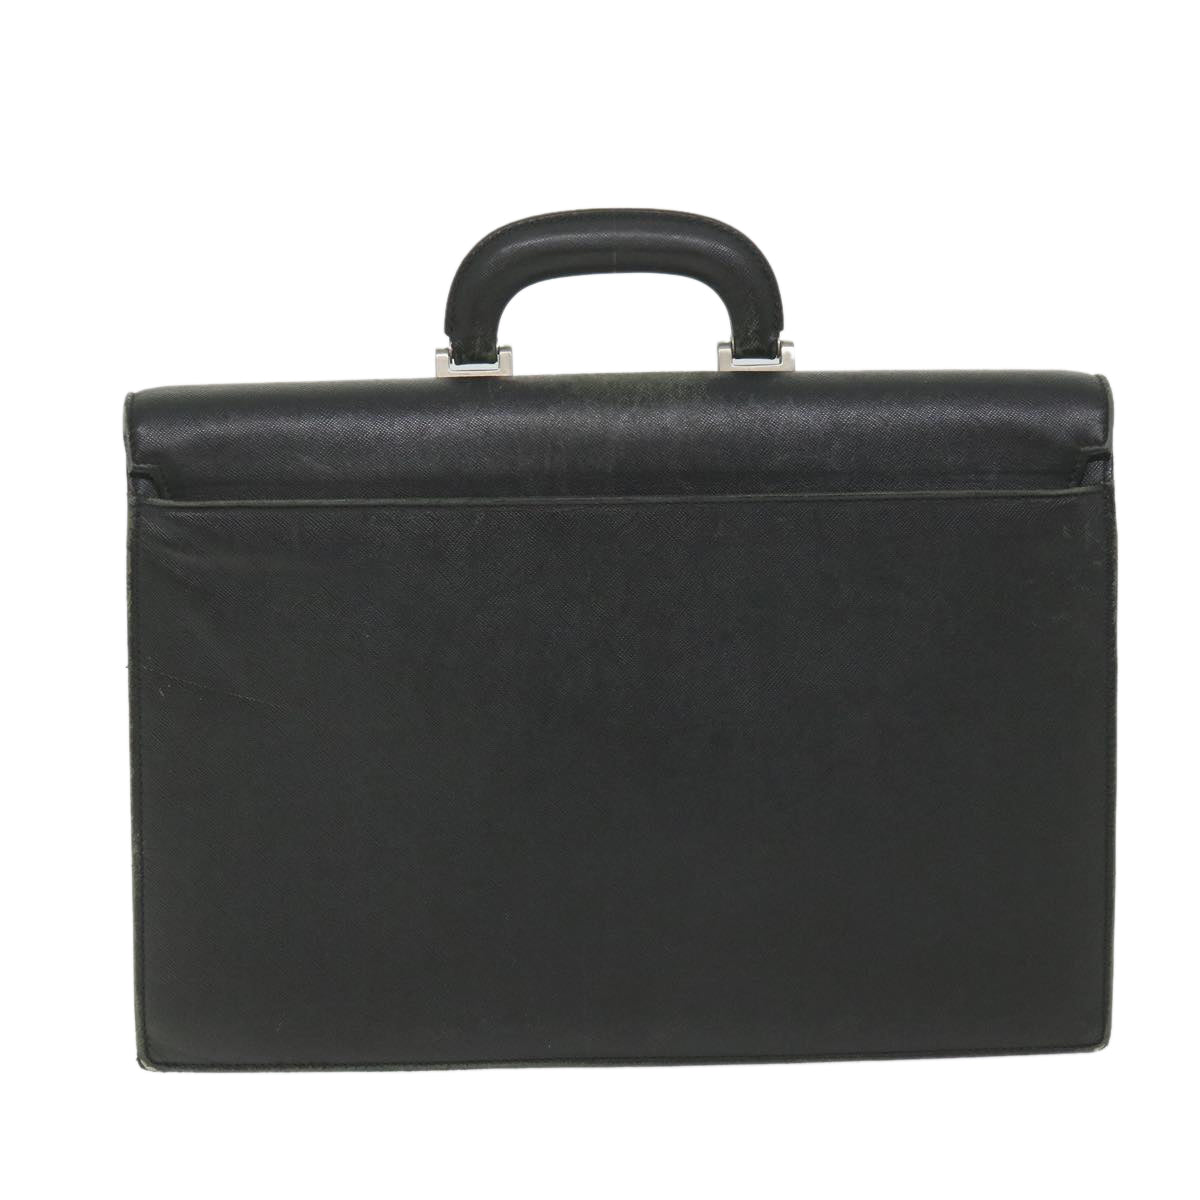 BURBERRY Briefcase Leather Black Auth 58915